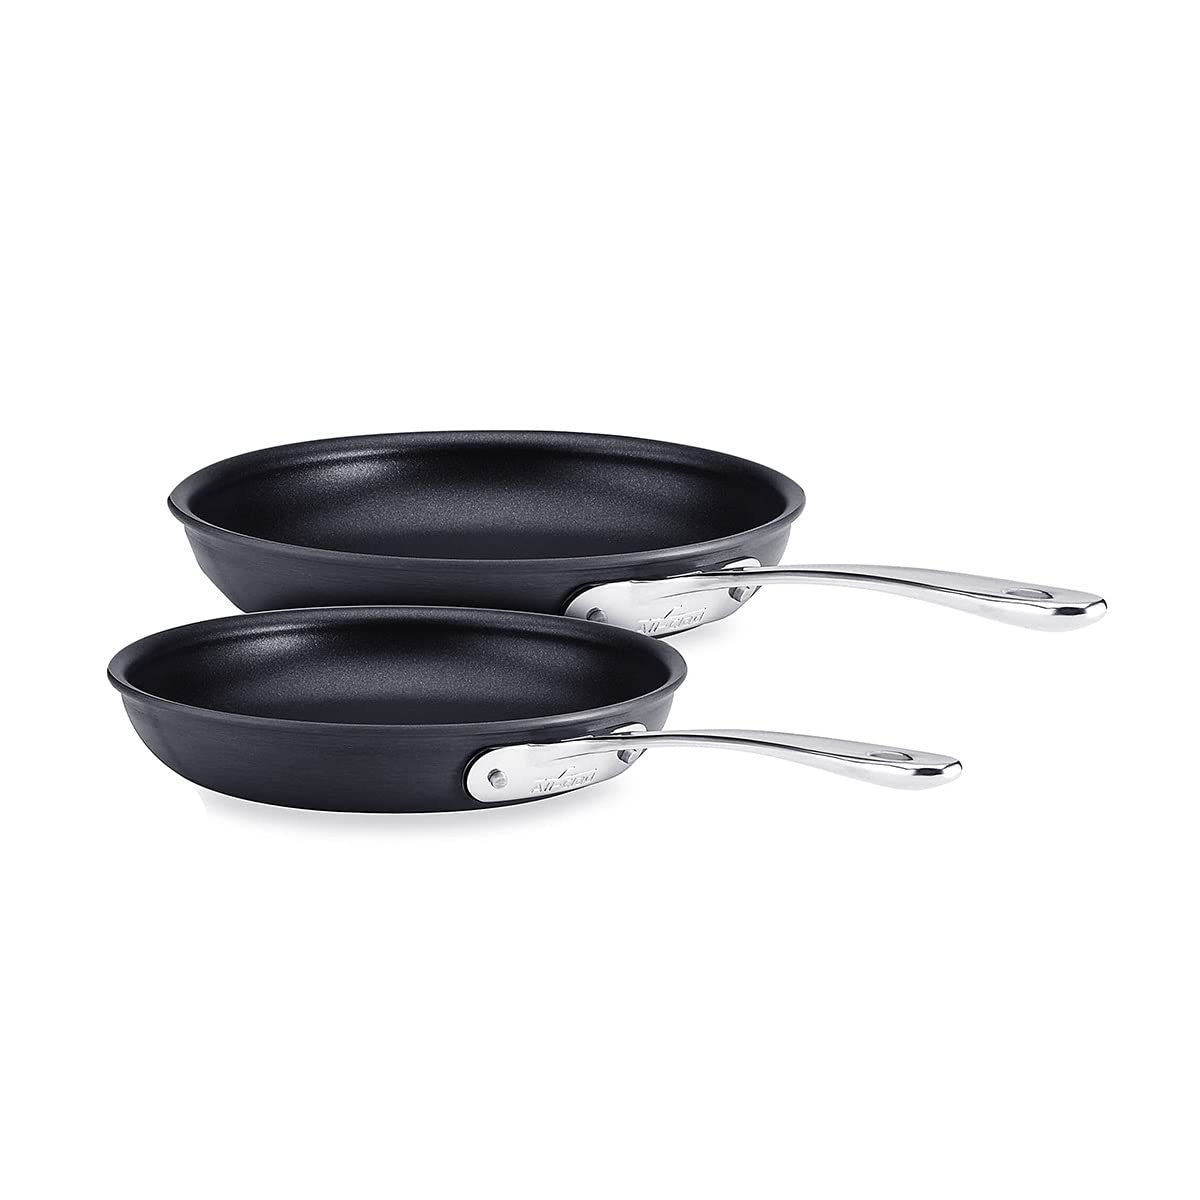 All-Clad HA1 Hard Anodized Nonstick 2 Piece Fry Pan Set...